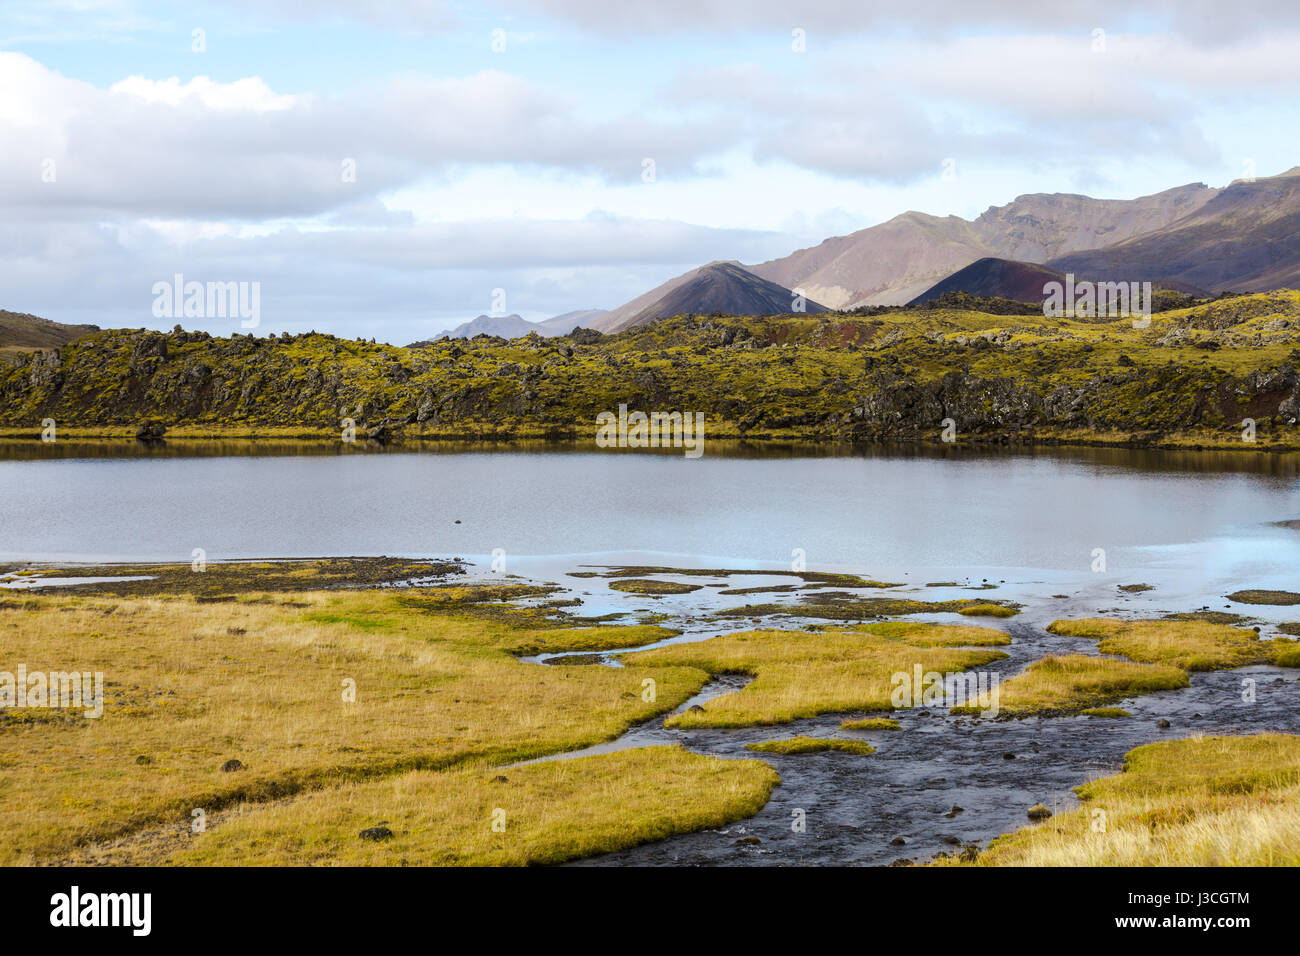 Cold water in Iceland. Stream in rocky mountains and lake side. Fresh and green grass. Beautiful mountain range in the backgrond. Stock Photo